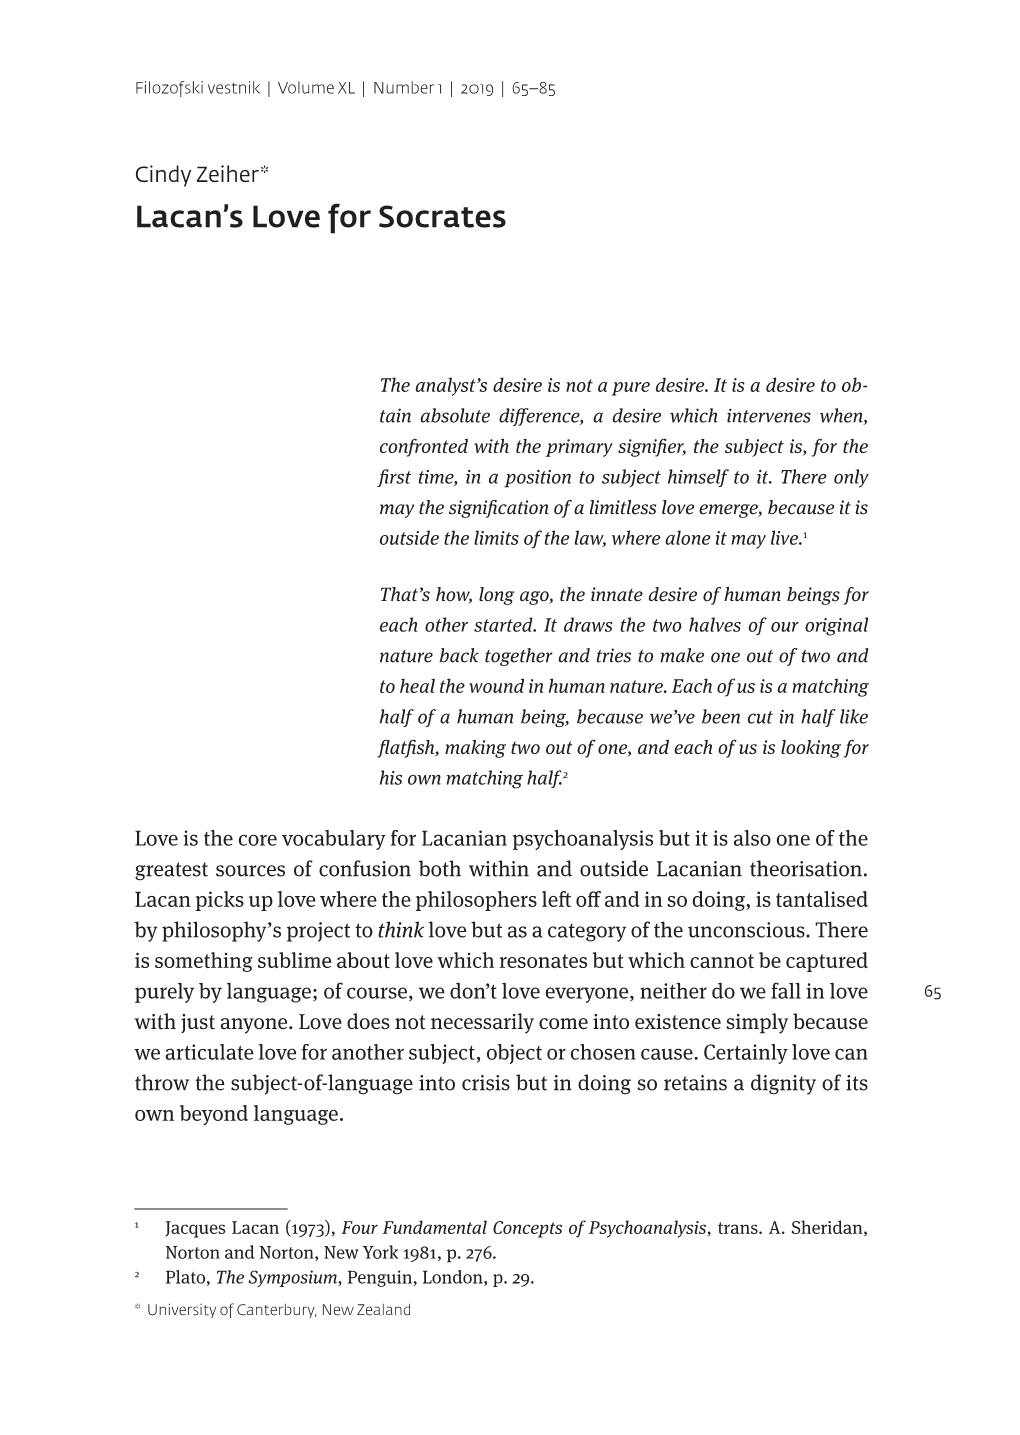 Lacan's Love for Socrates